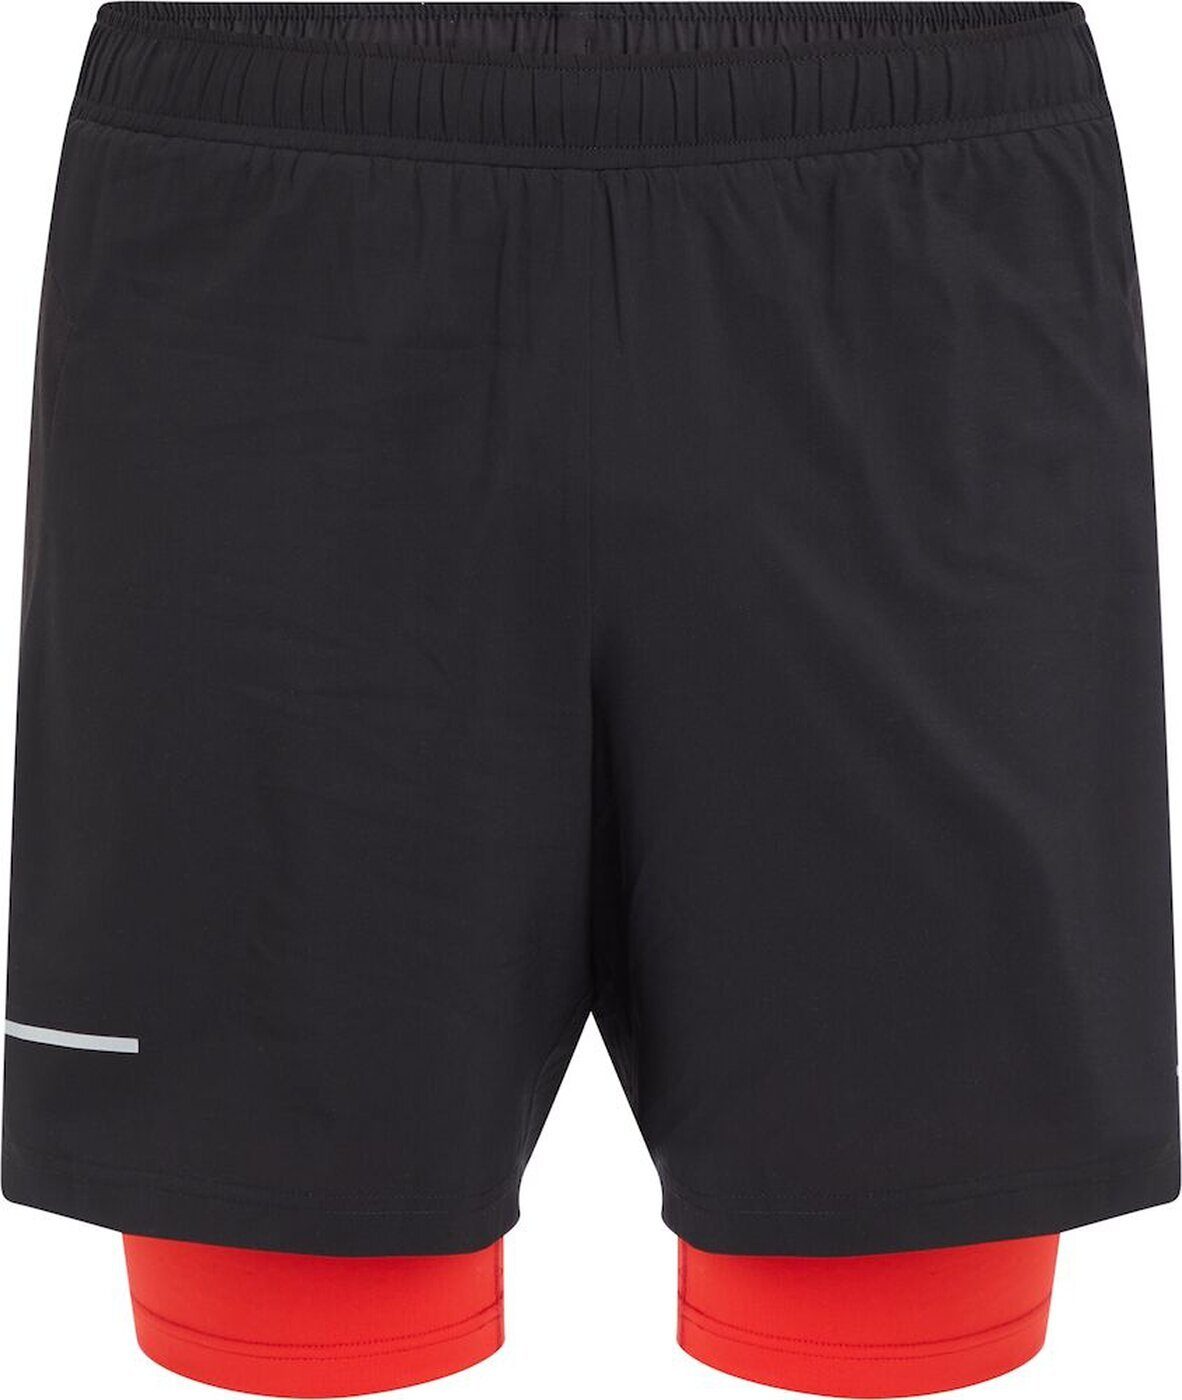 Energetics 2-in-1-Shorts He.-Shorts Allen IV ux BLACK/RED